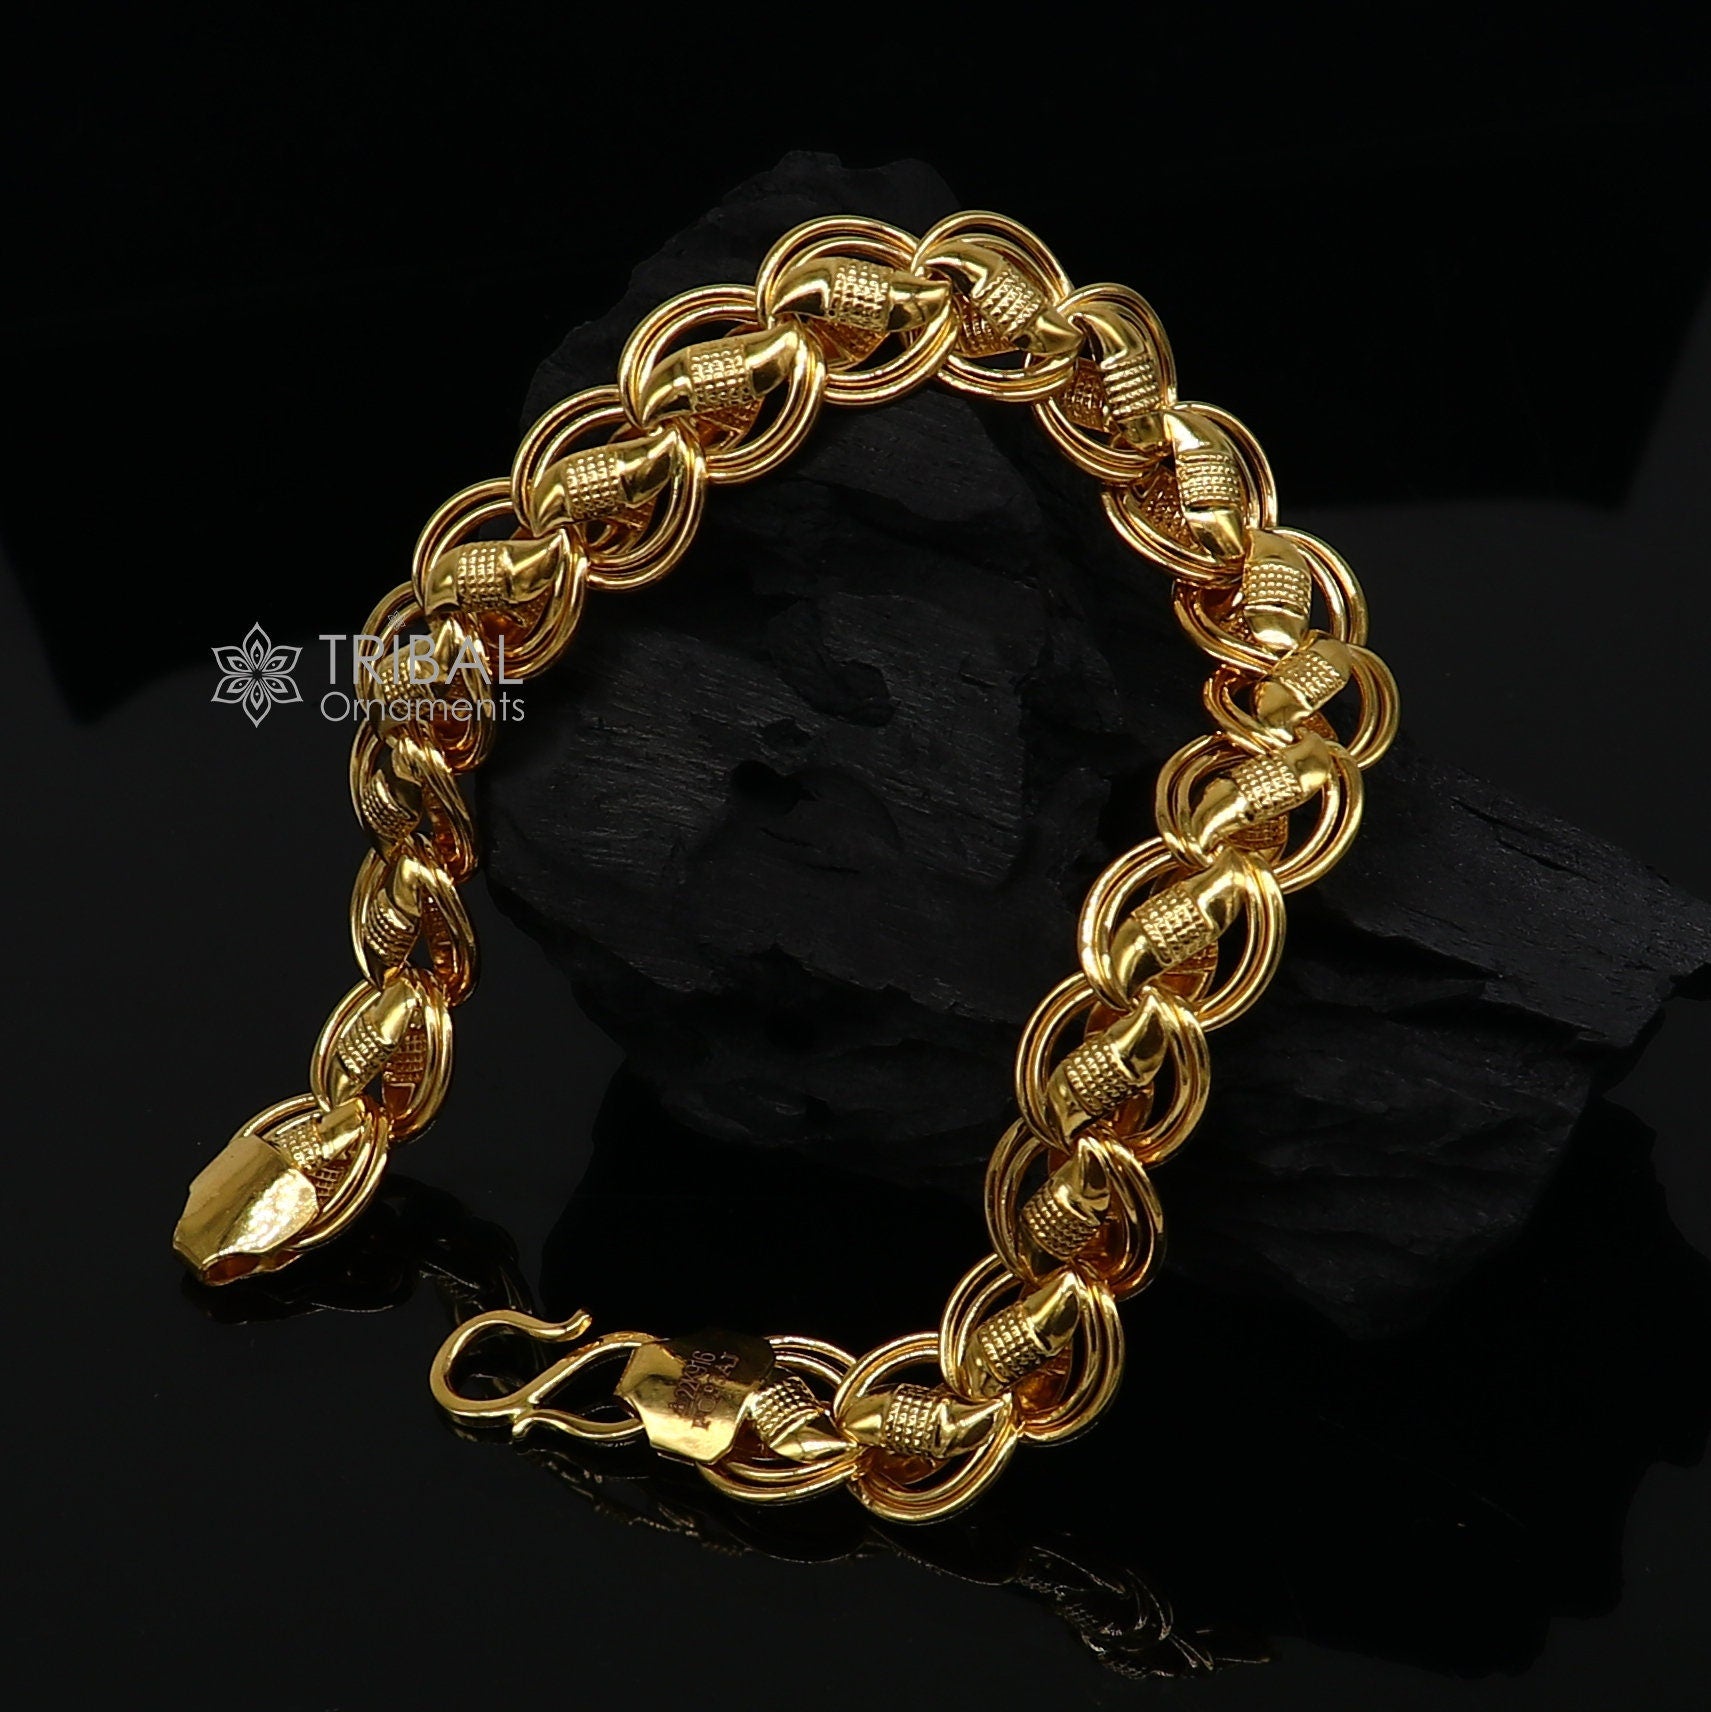 Exclusive trendy lotus design handmade 22kt  yellow gold All size bracelet best men's wedding gifting jewelry from india gbr75 - TRIBAL ORNAMENTS